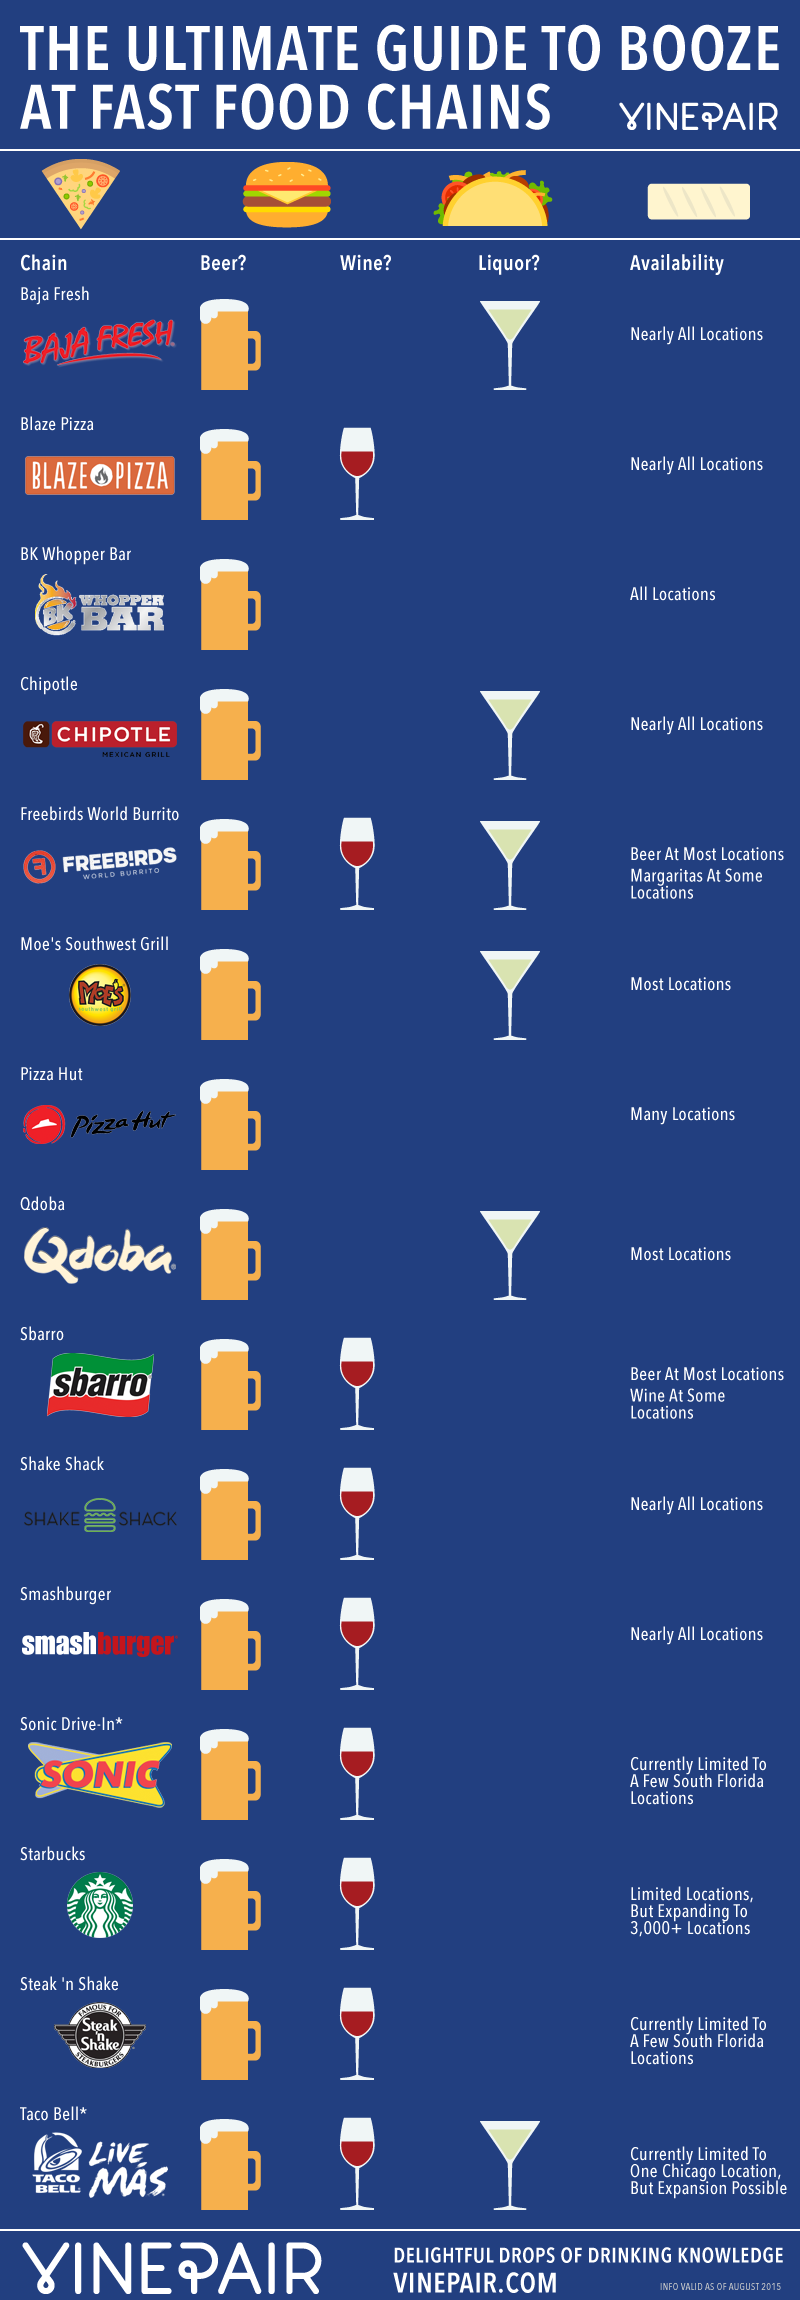 The Ultimate Guide To Fast Food Chains That Serve Alcohol